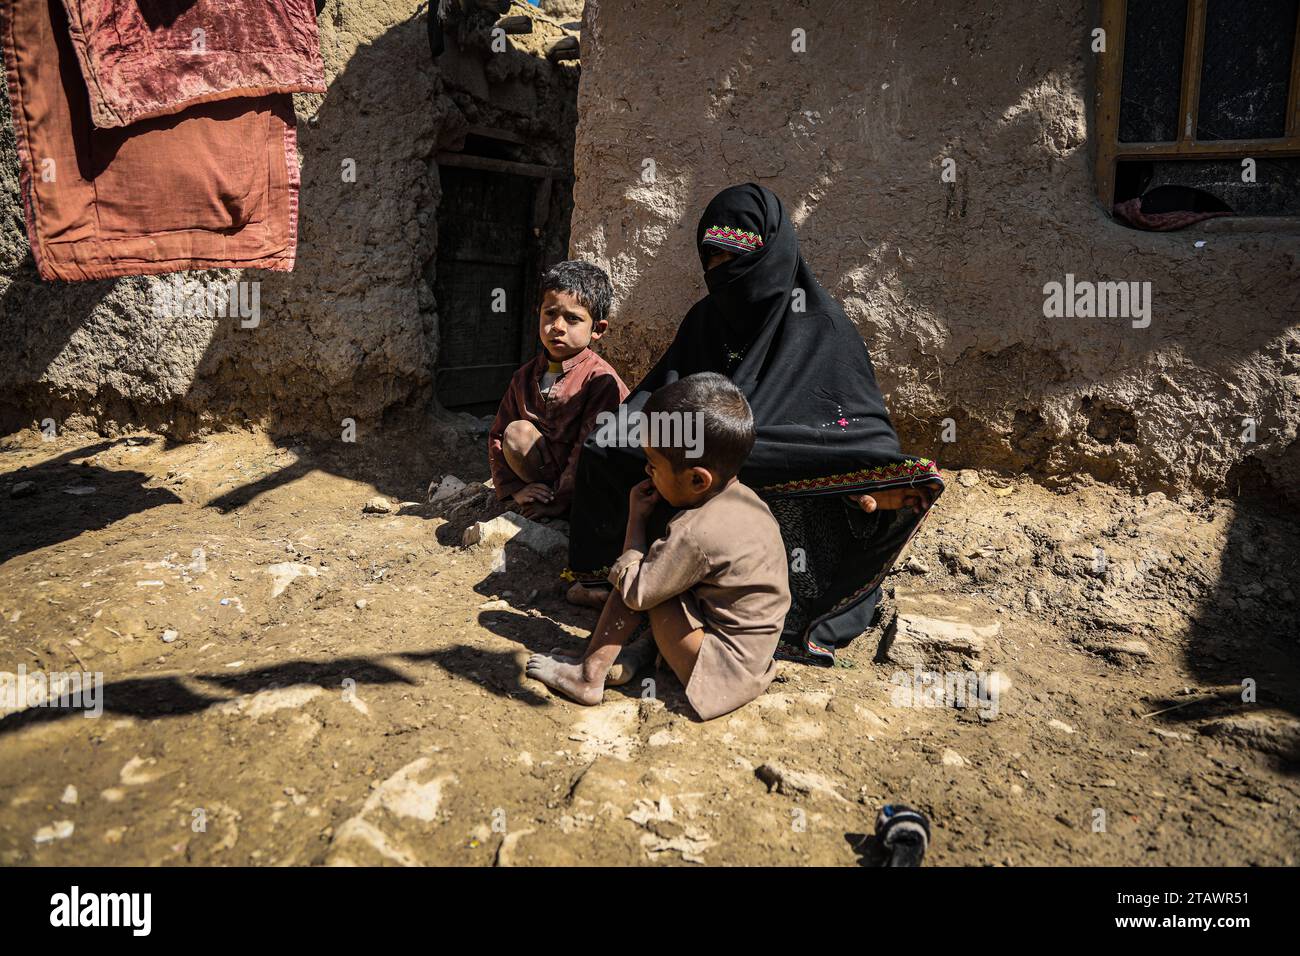 A sad widow in need, accompanied by her children, represents Afghan families facing poverty and hardship | Refugee family. Stock Photo